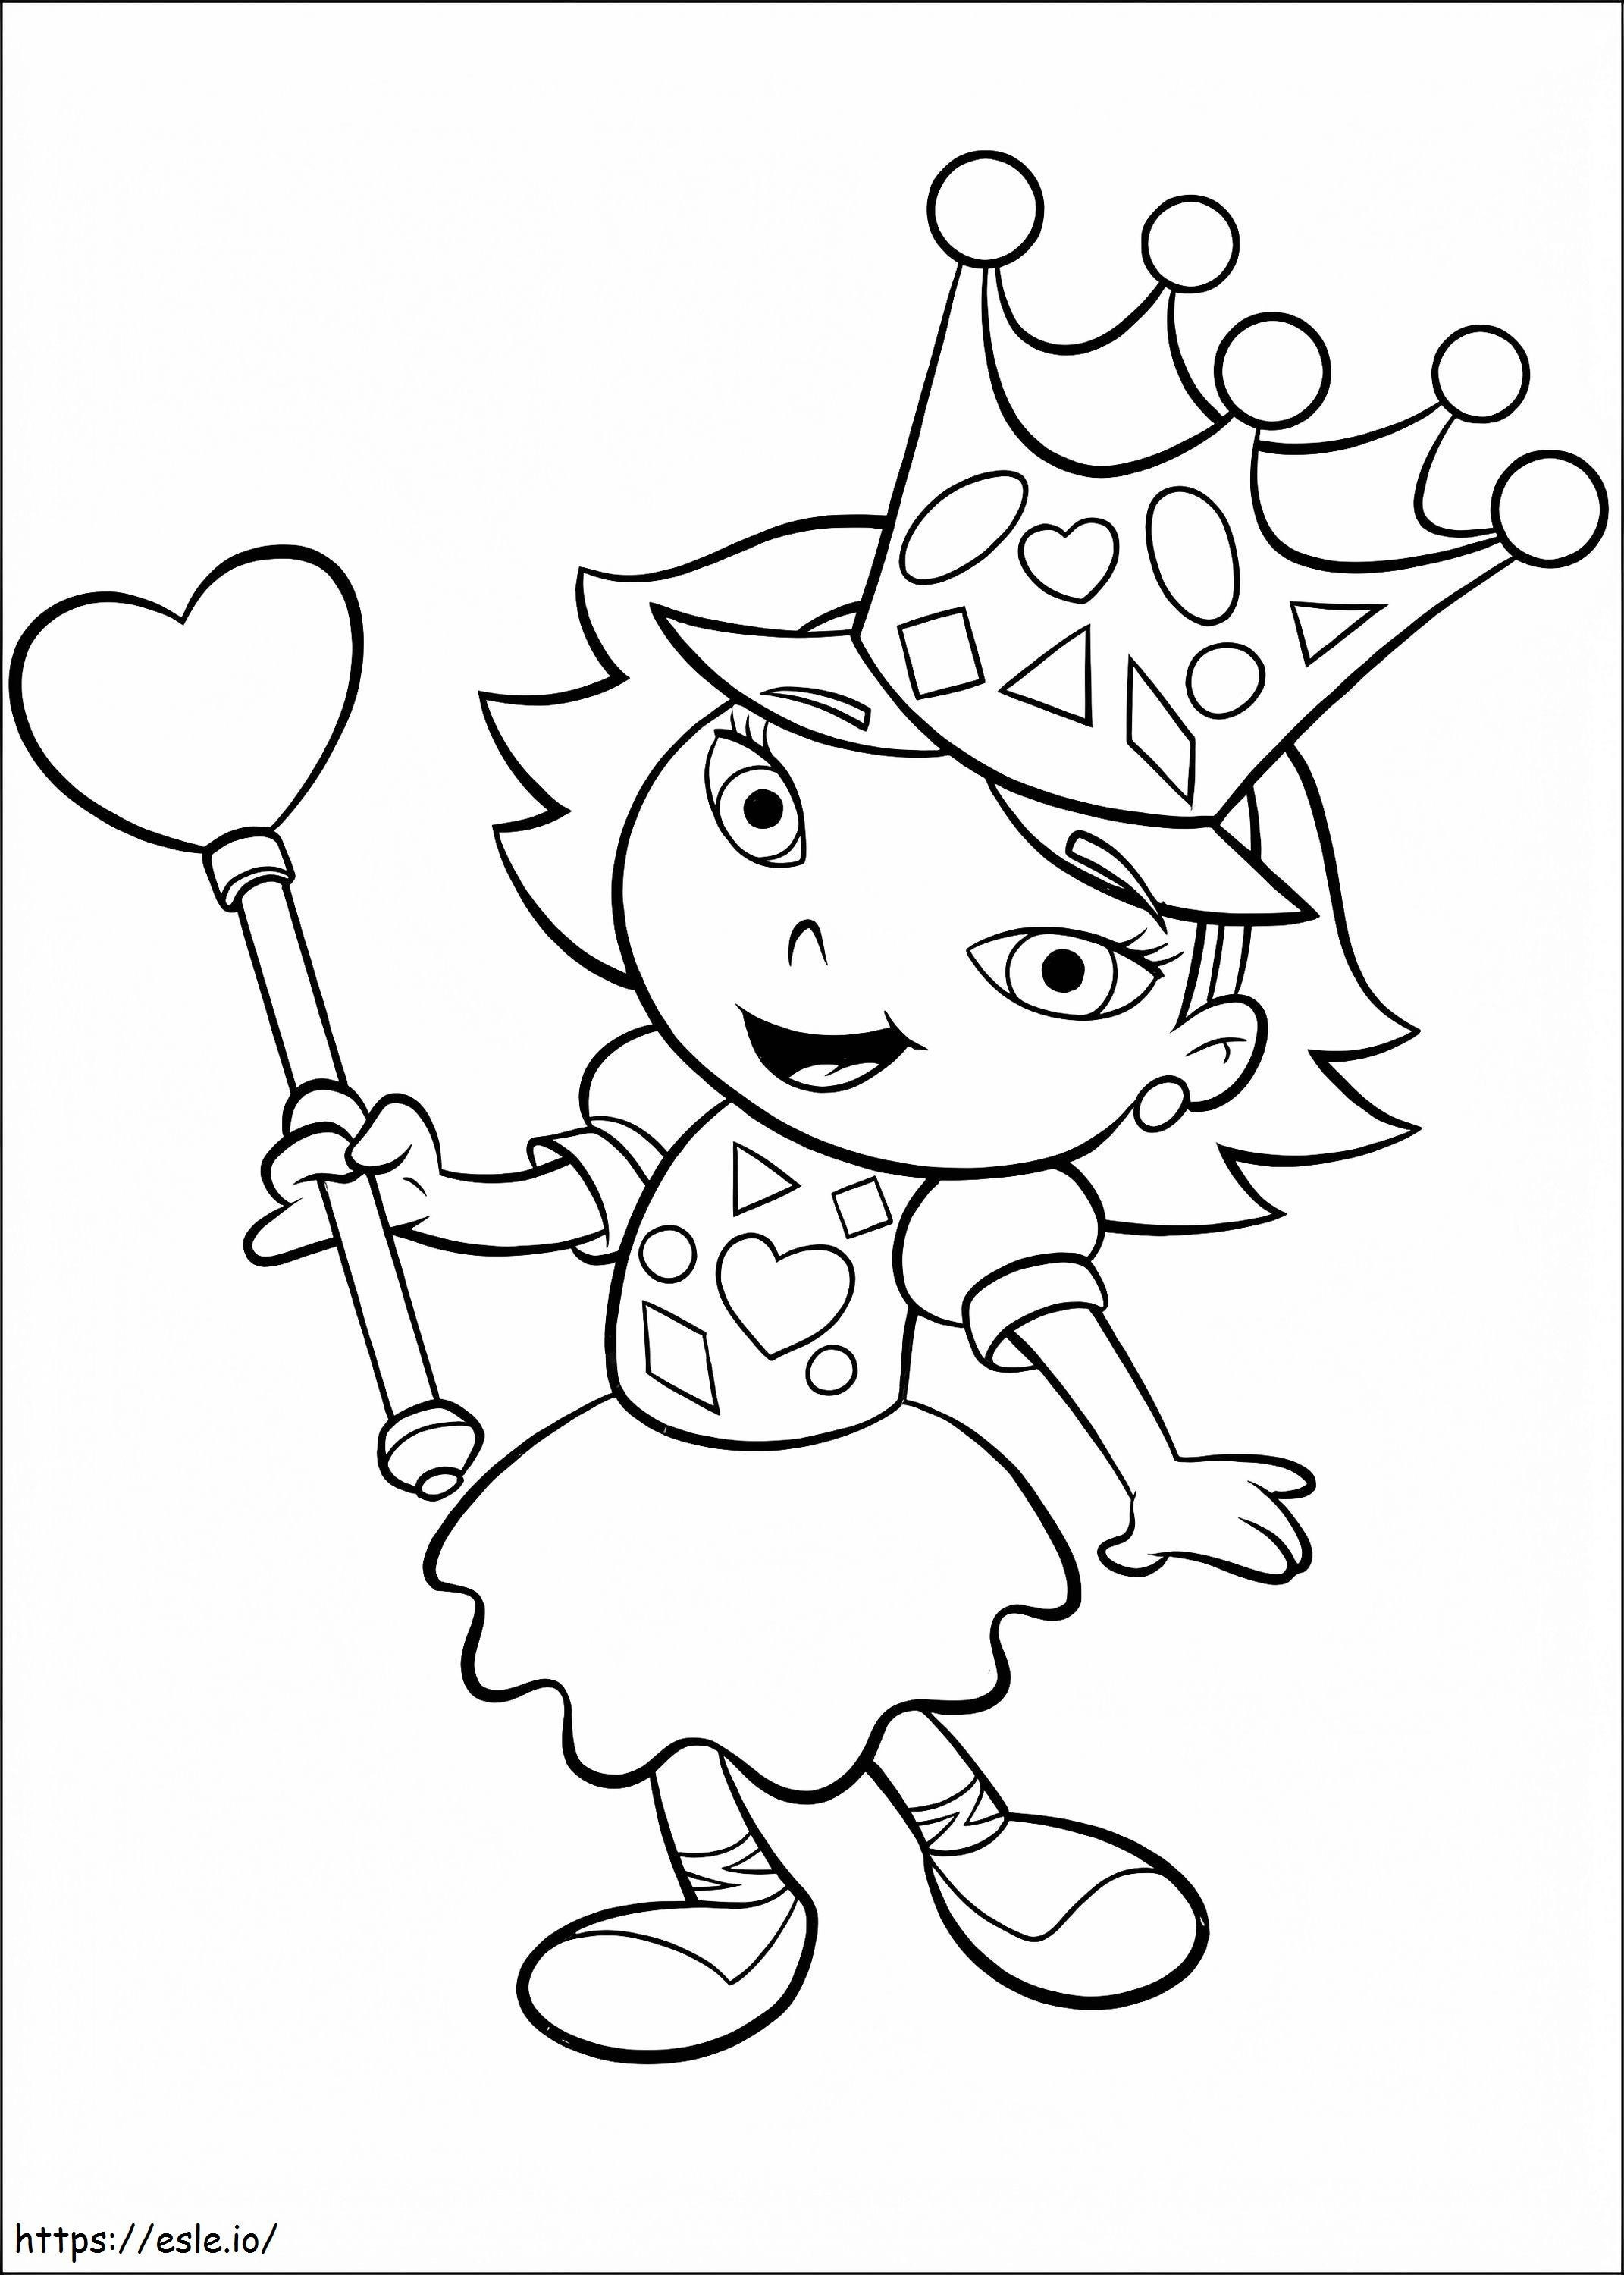 June Little Einsteins coloring page